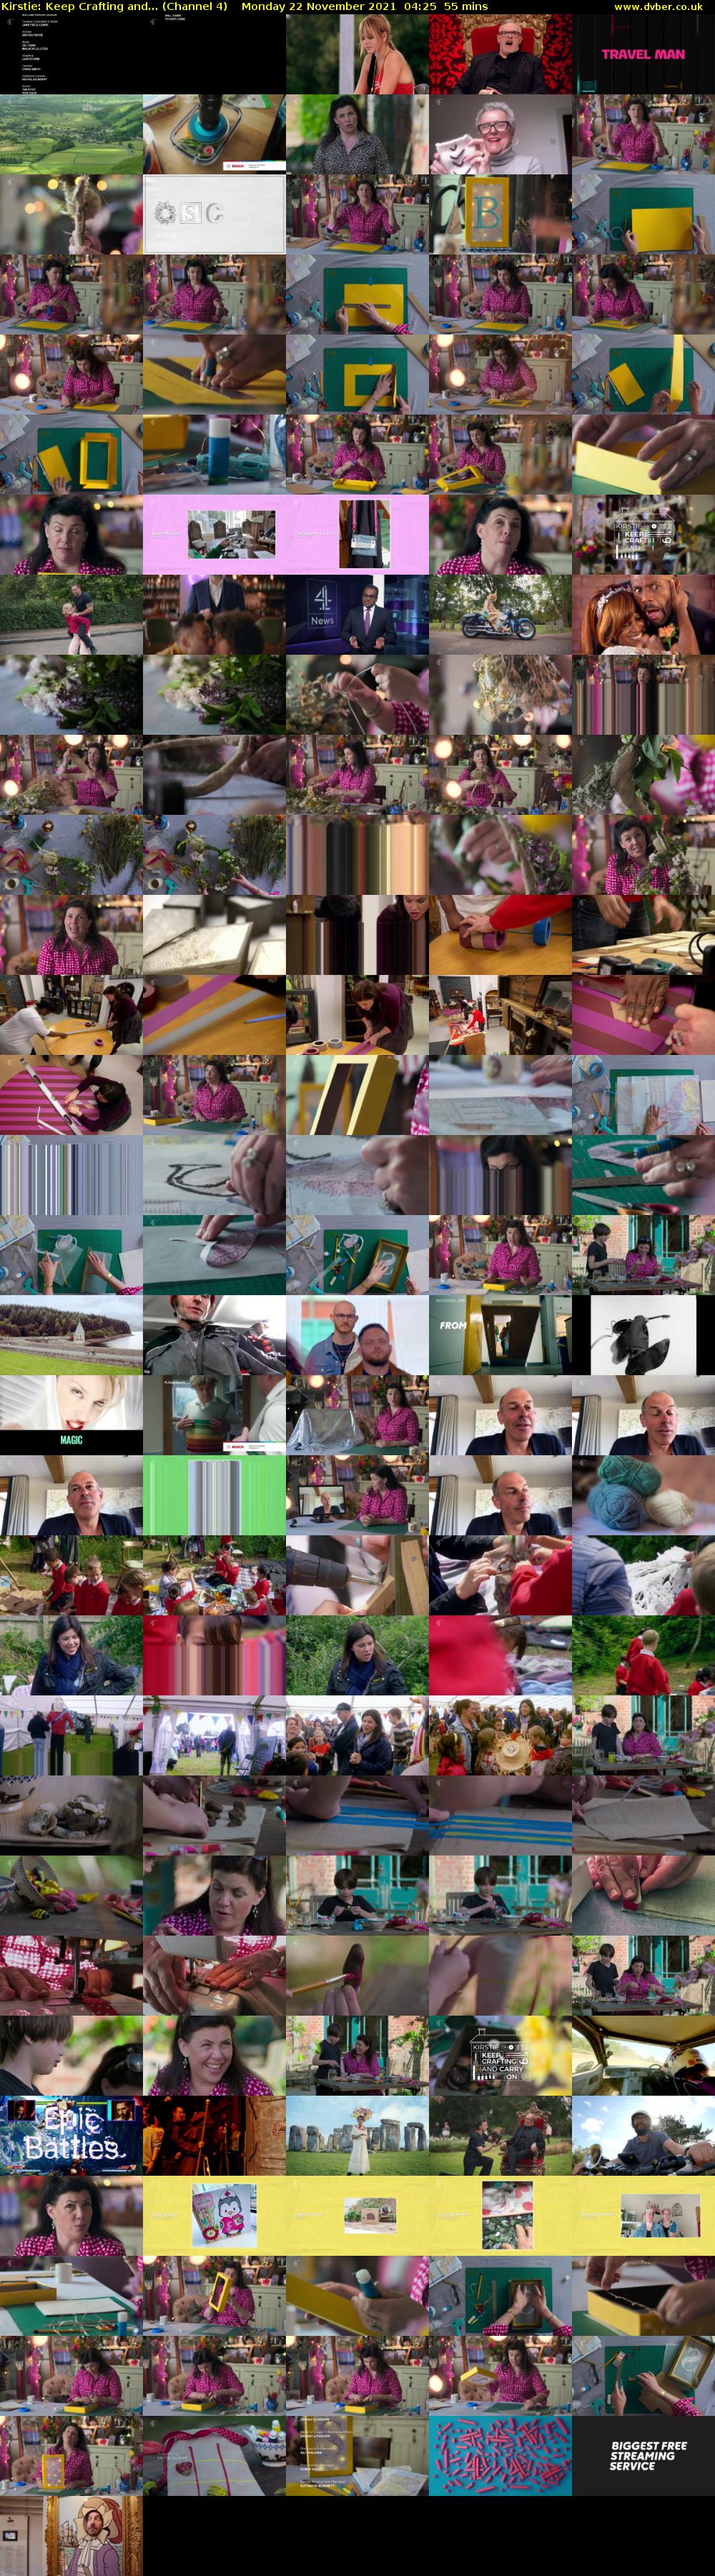 Kirstie: Keep Crafting and... (Channel 4) Monday 22 November 2021 04:25 - 05:20